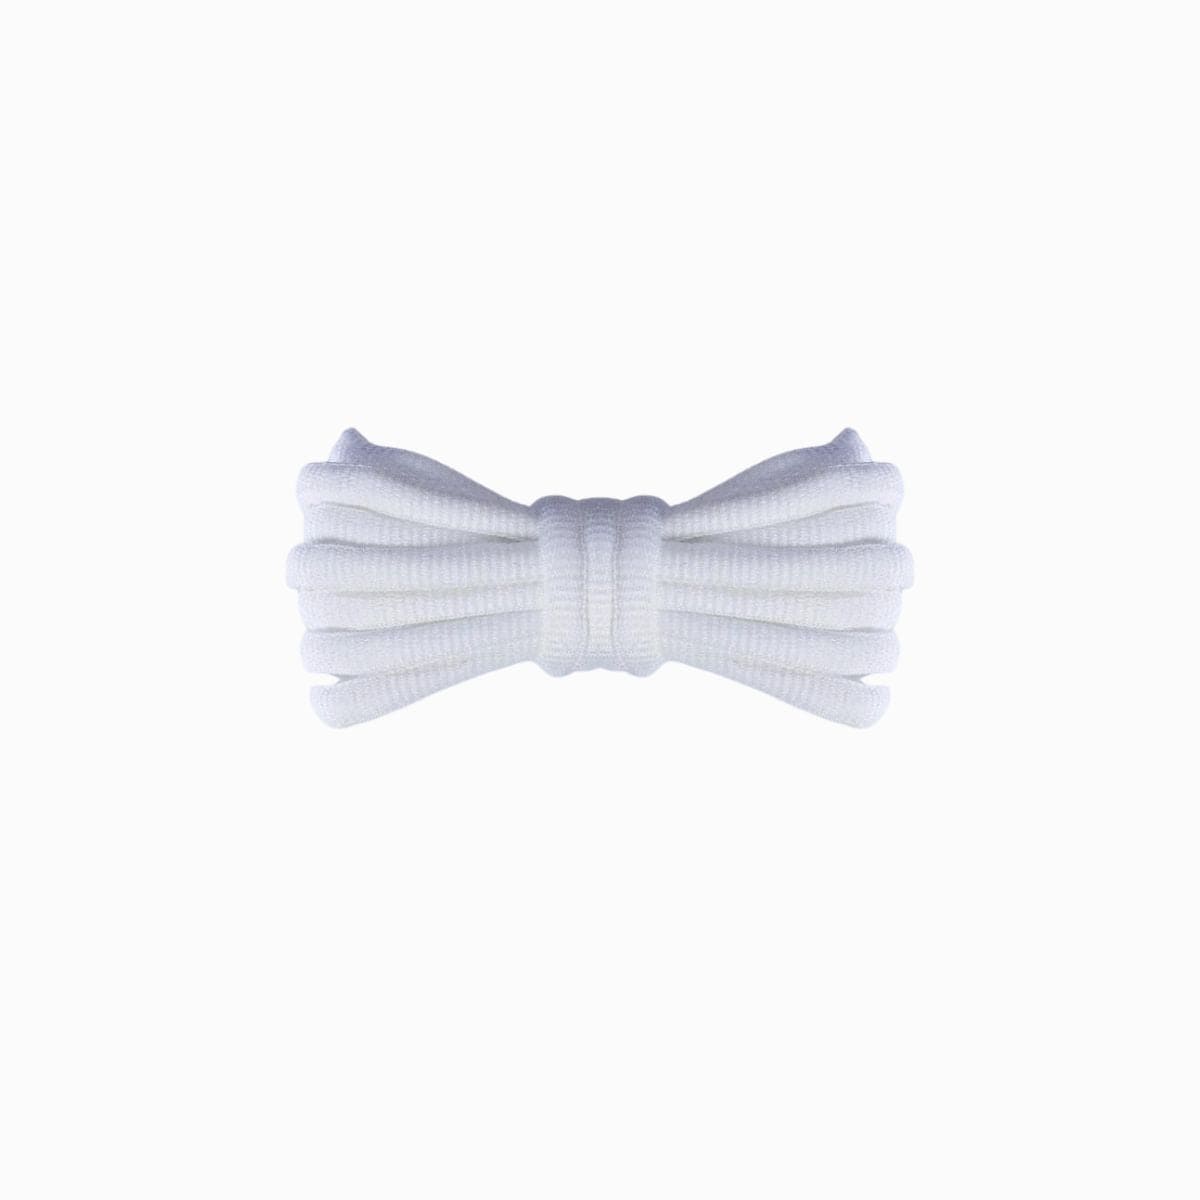 Nike_TN_Replacement_Shoelaces_White